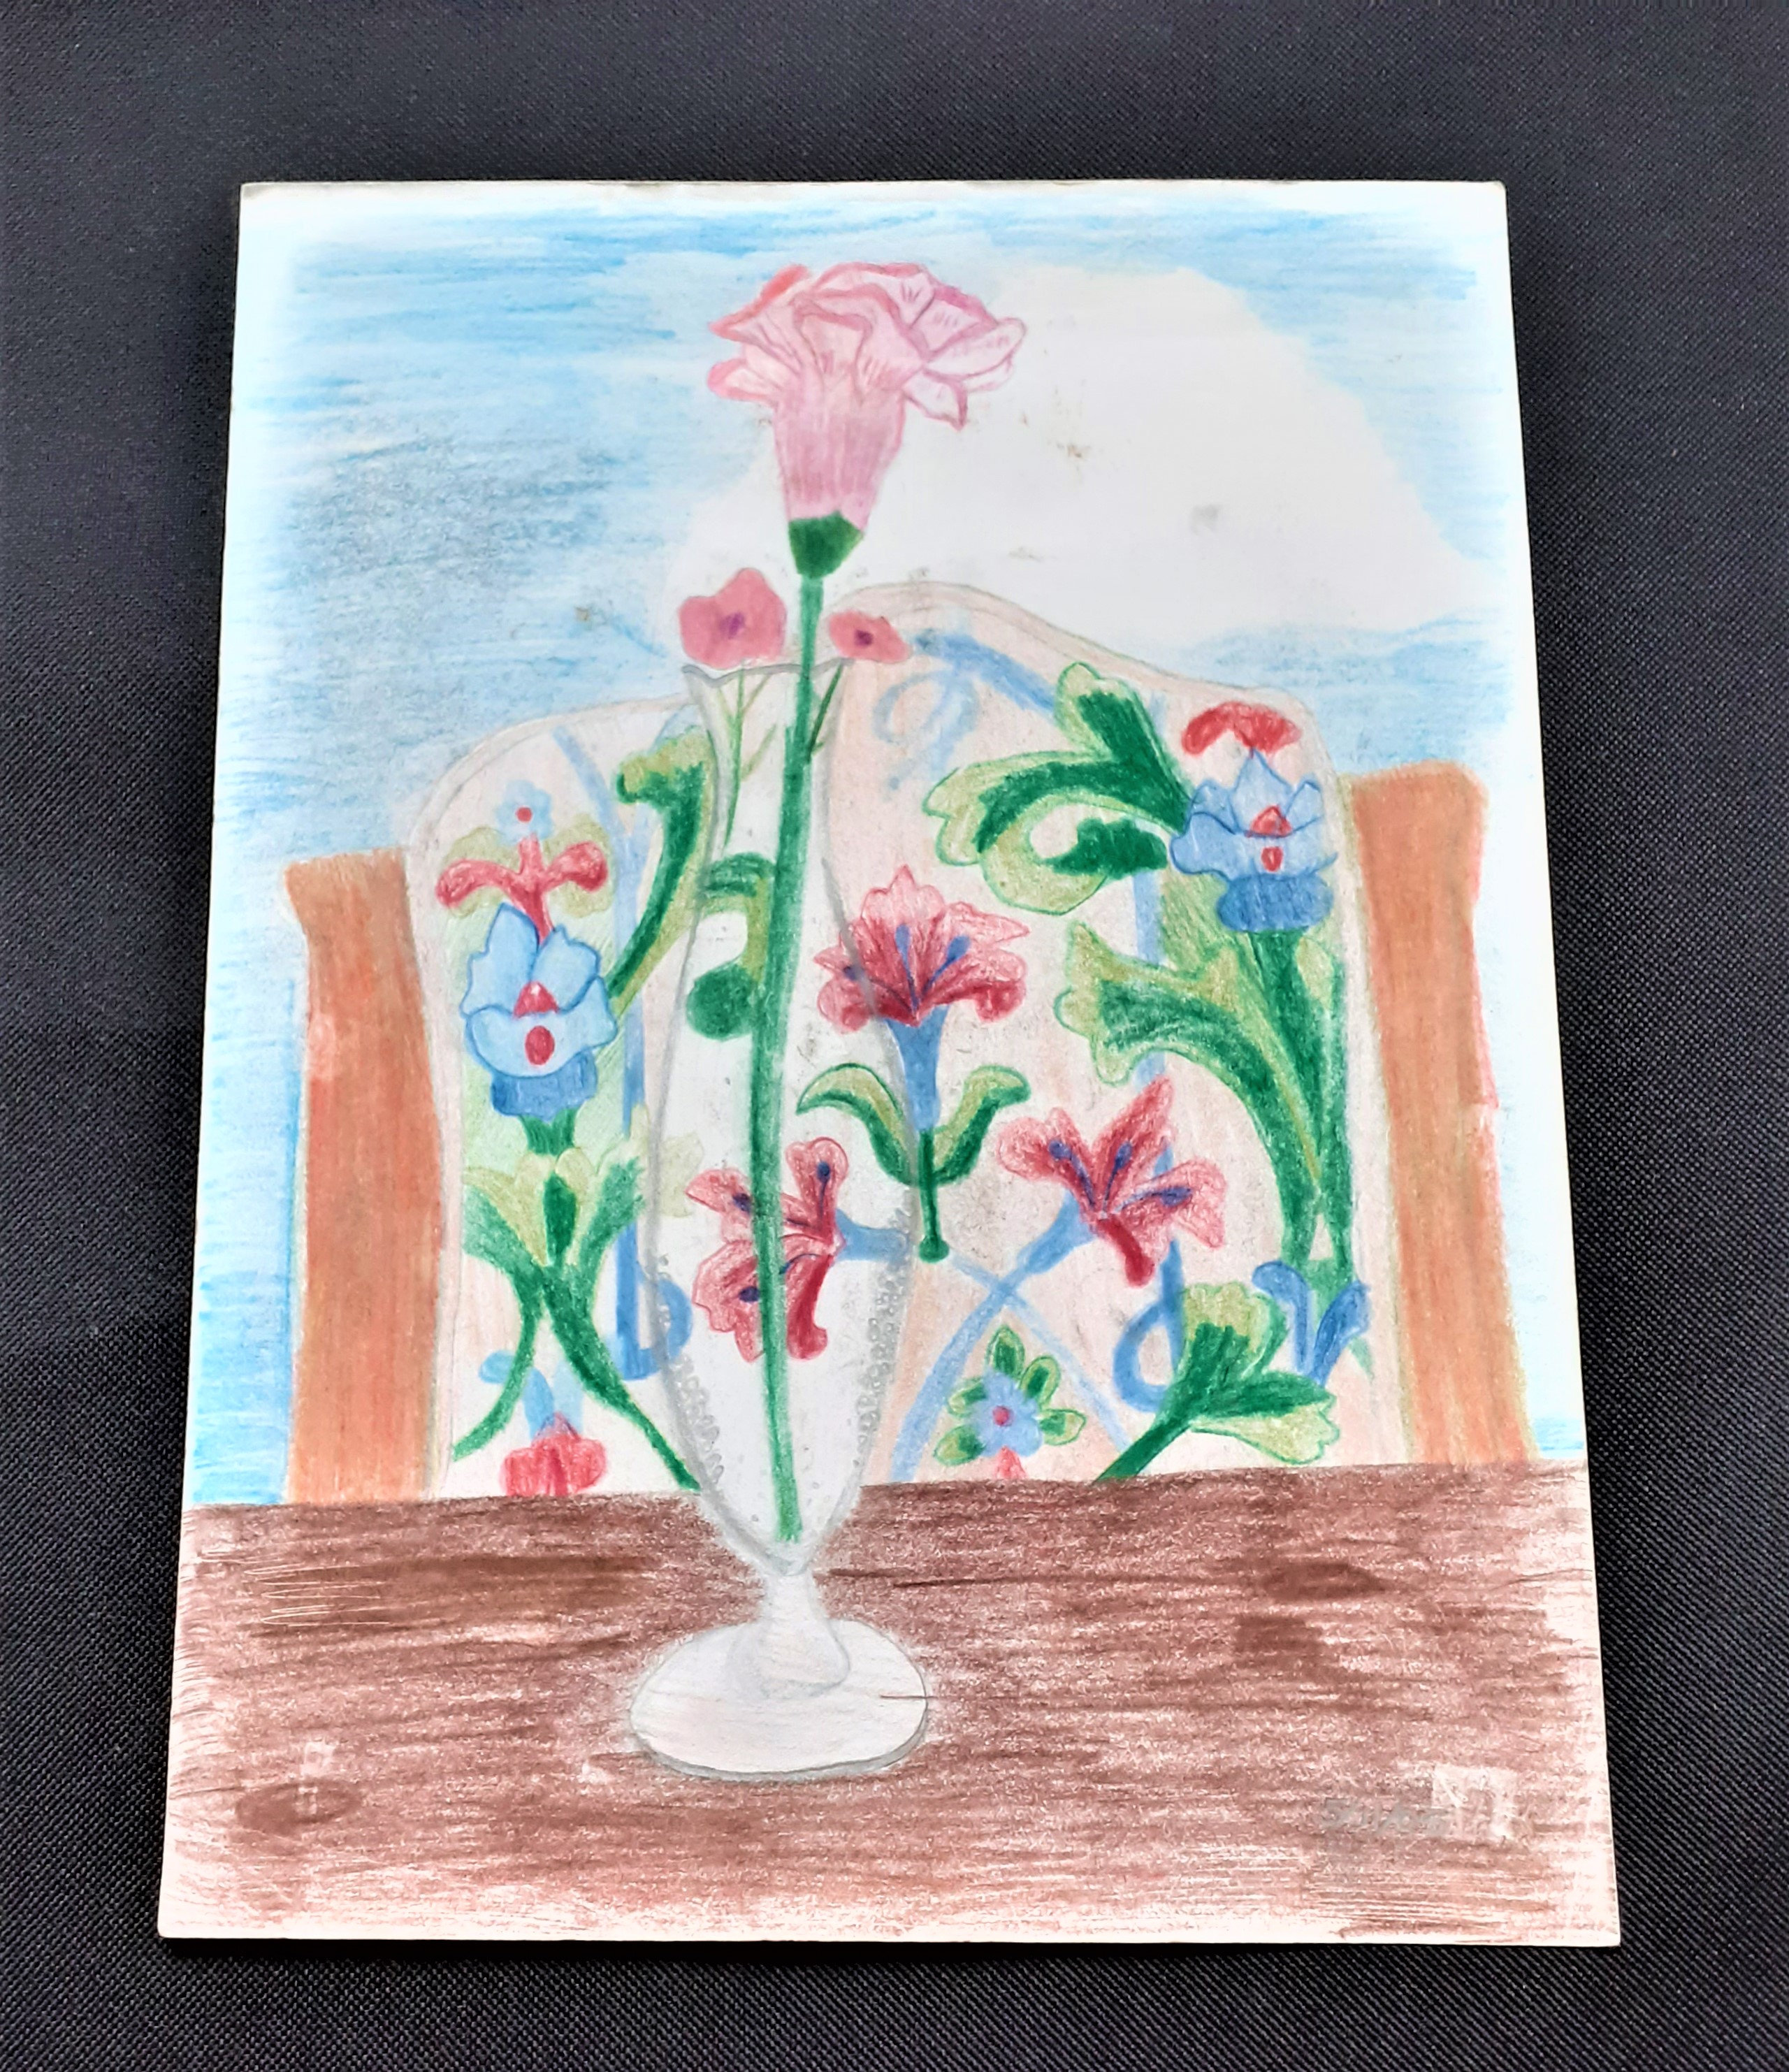 vase on table drawing